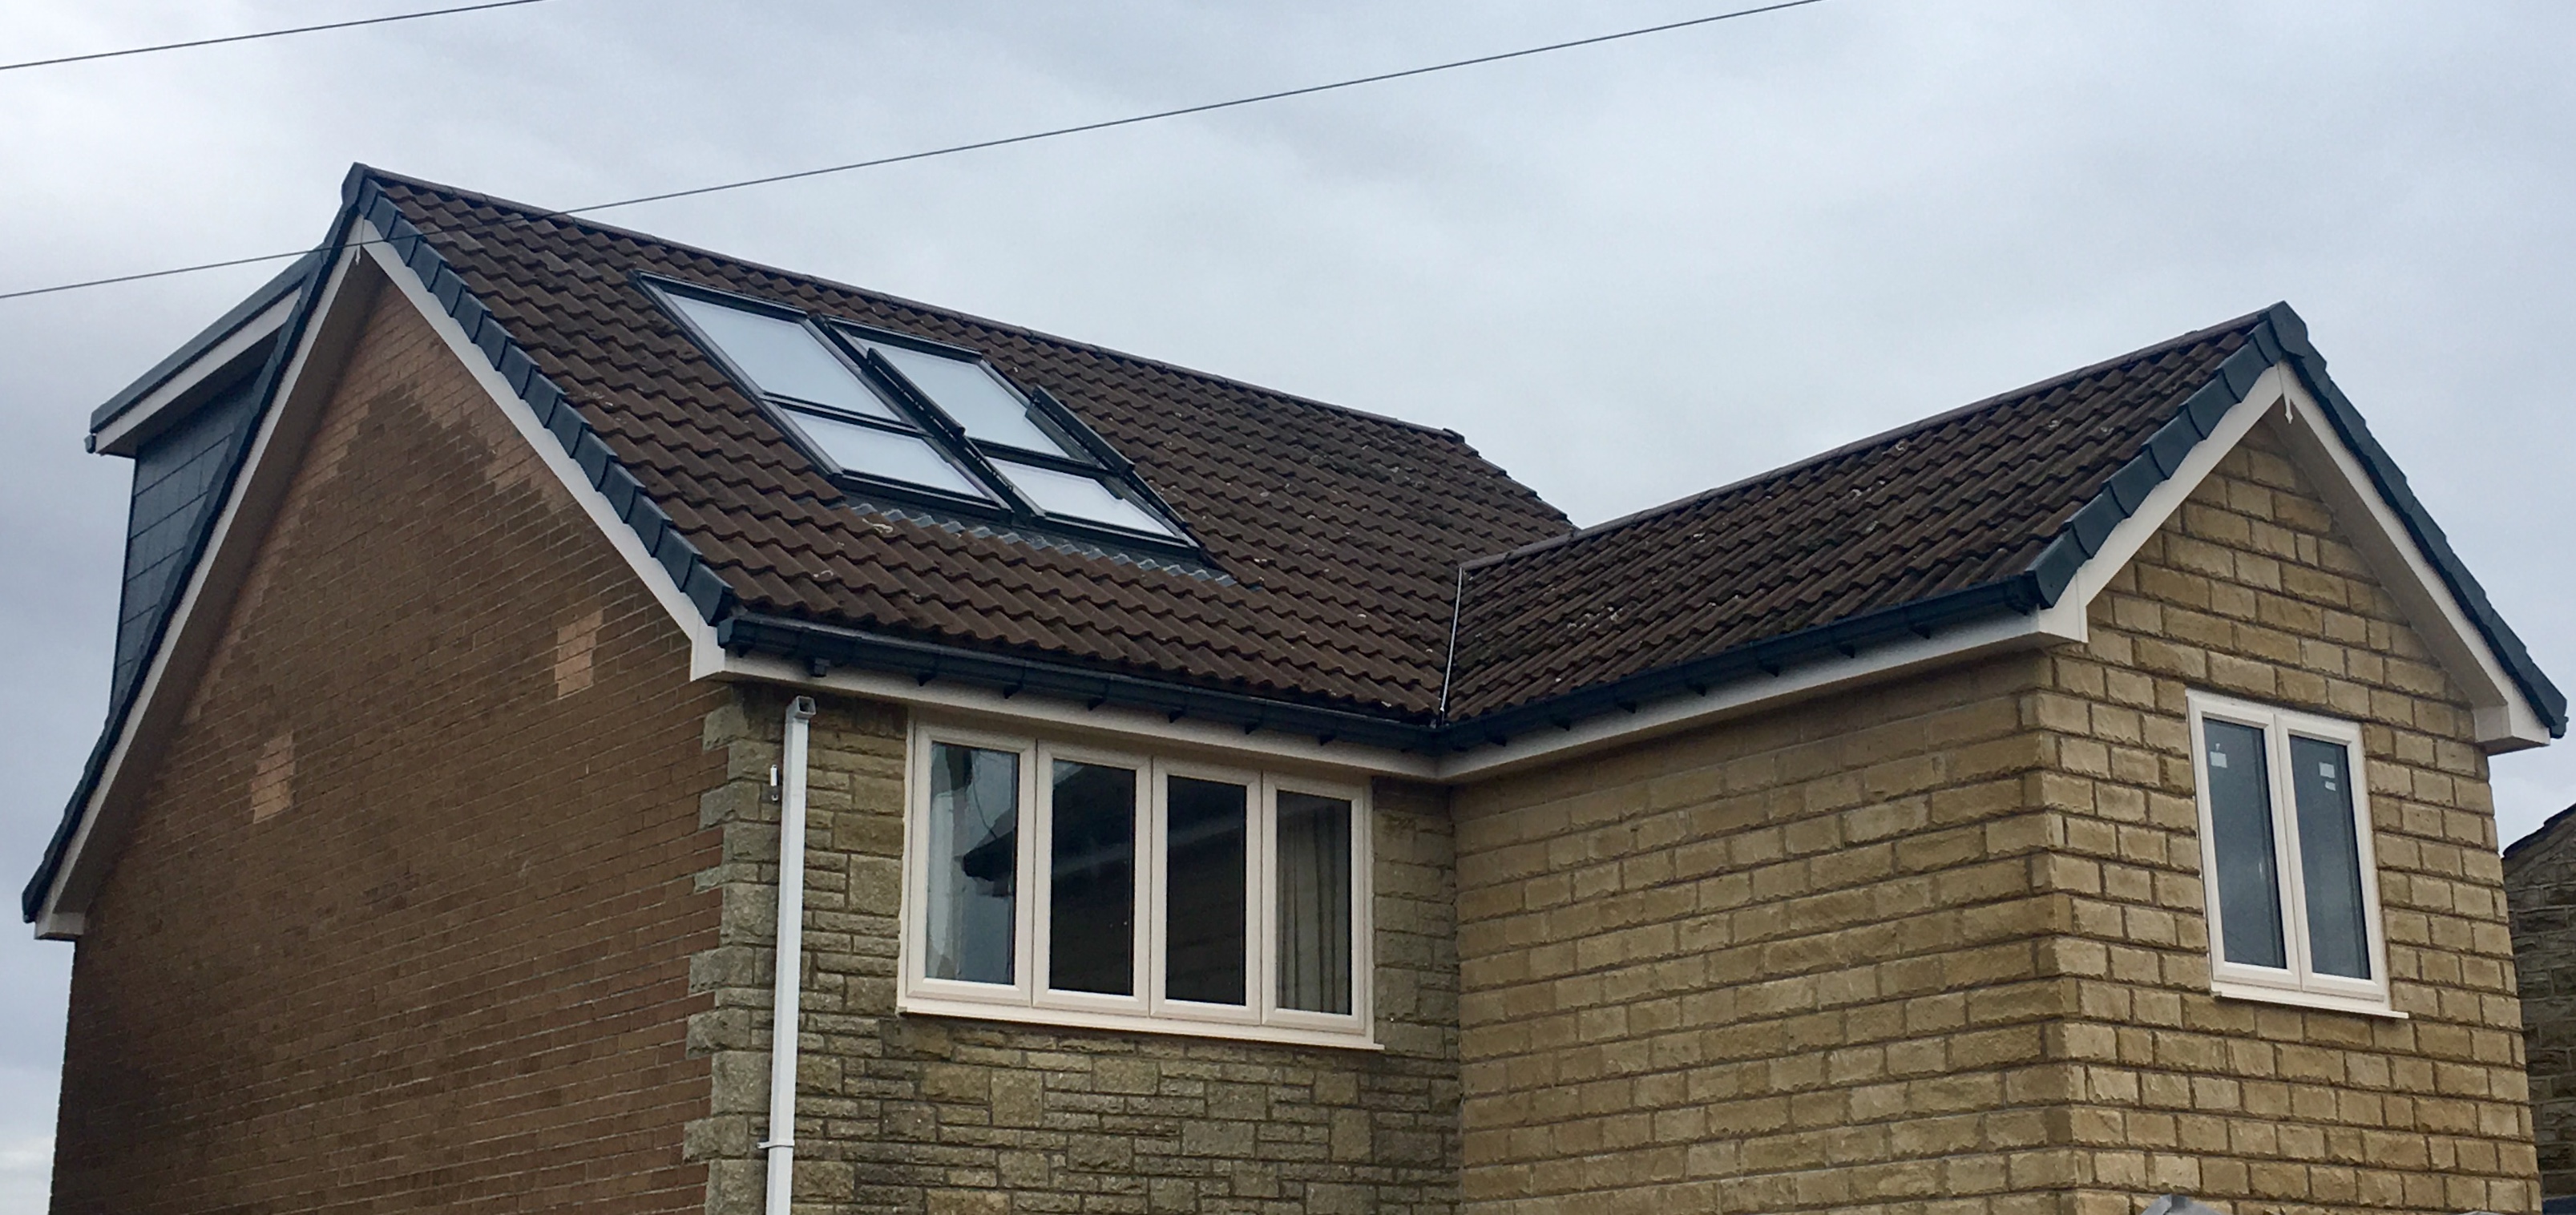 house extension example showing dormer room